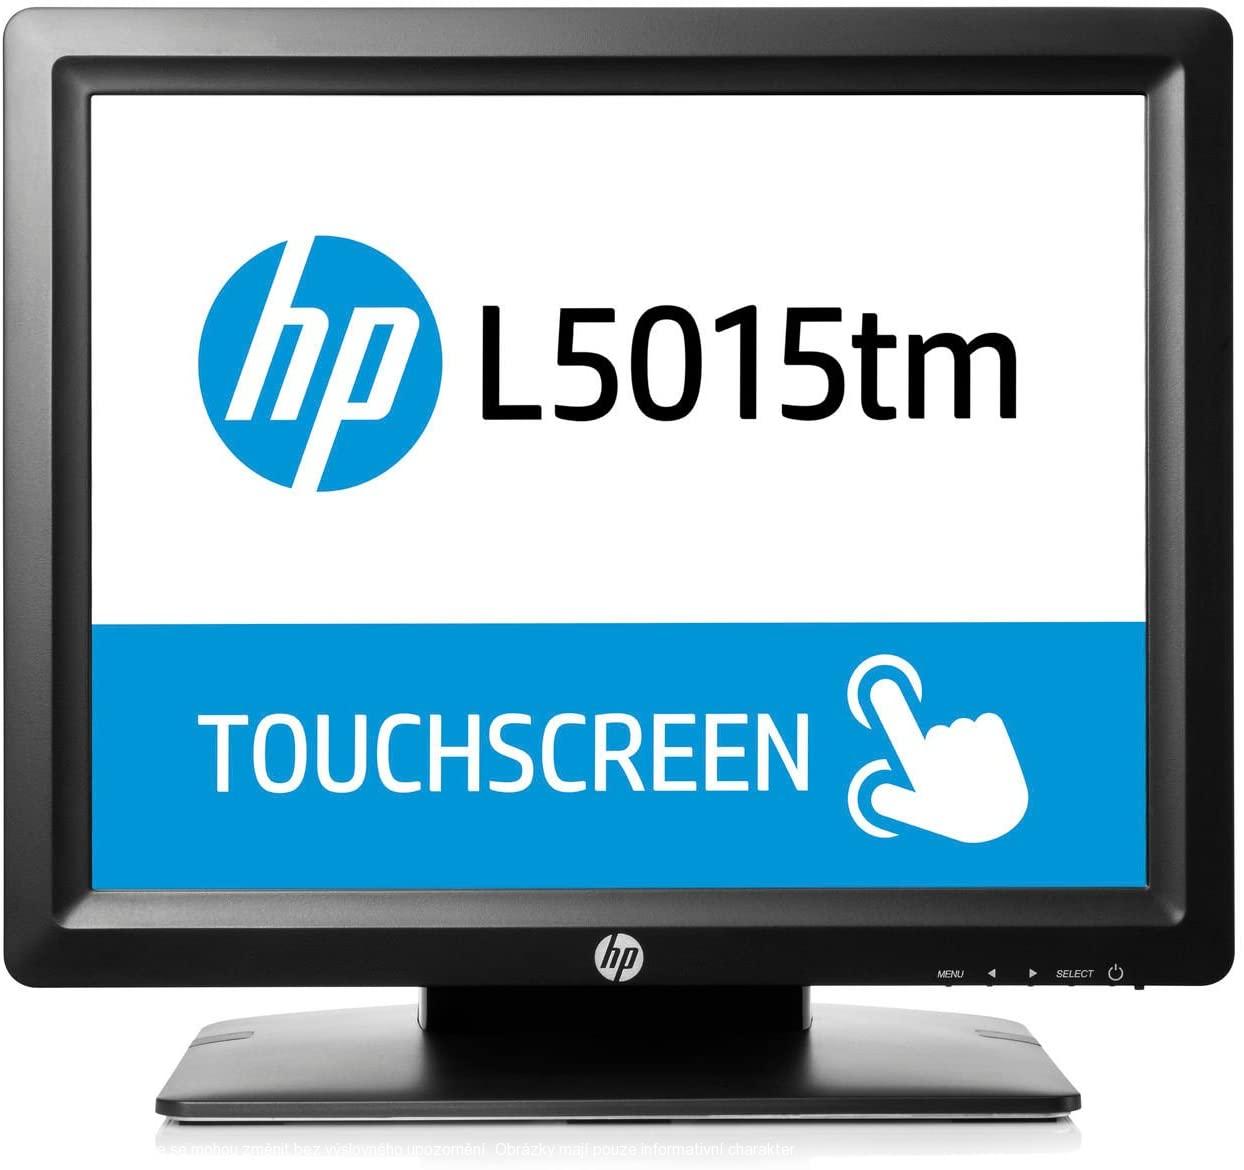 HP L5015 tm Touch Monitor, center